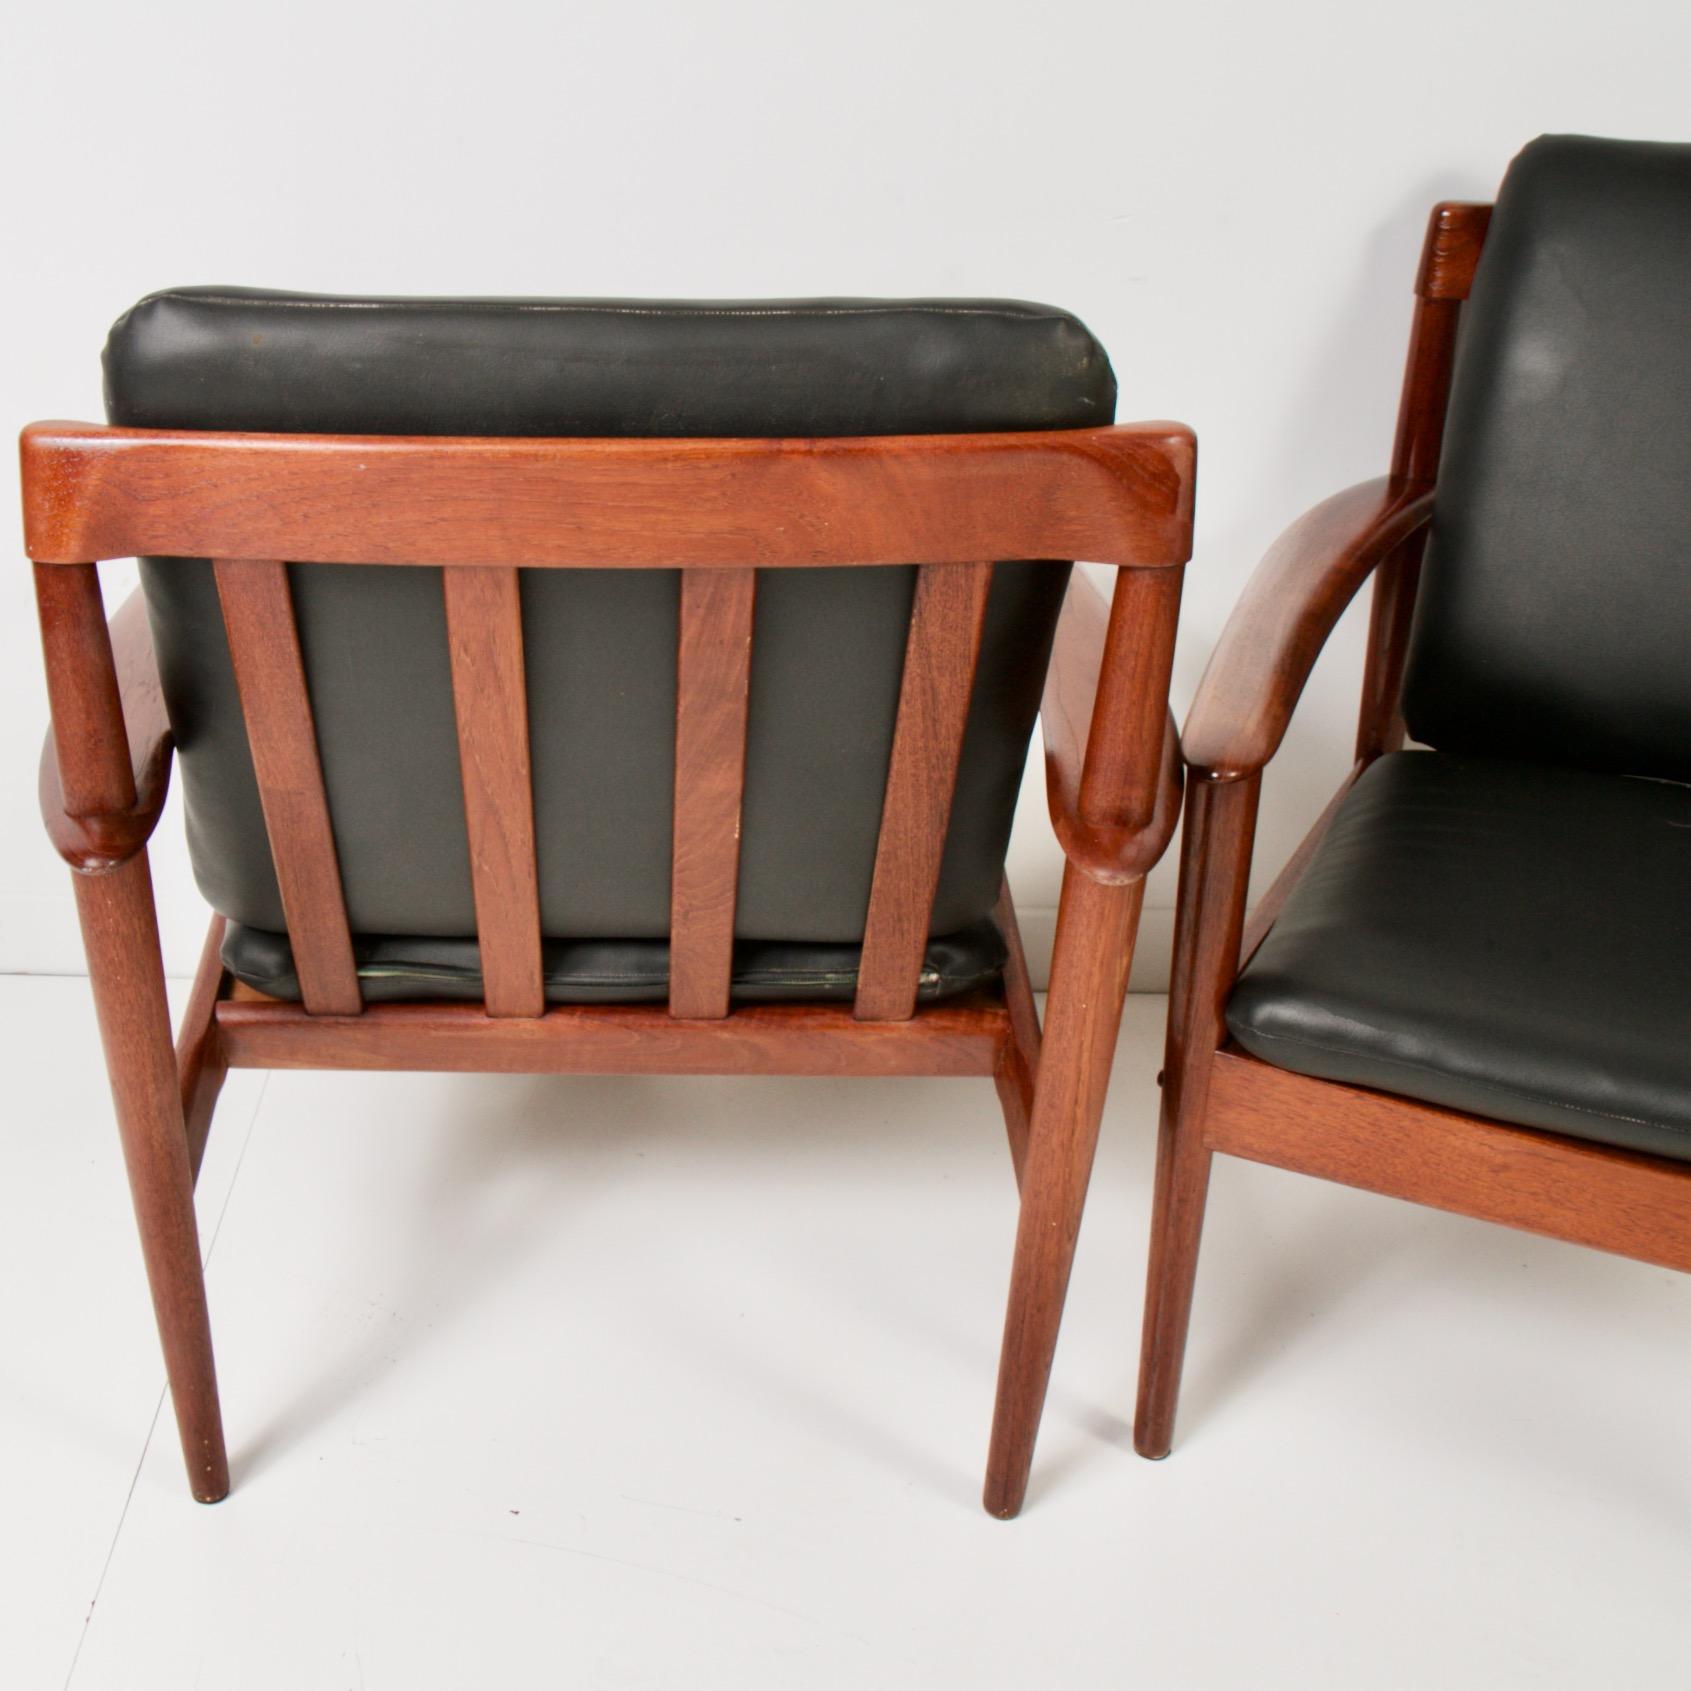 Pair of Danish Modern Teak Lounge Chairs by Grete Jalk In Good Condition For Sale In New London, CT